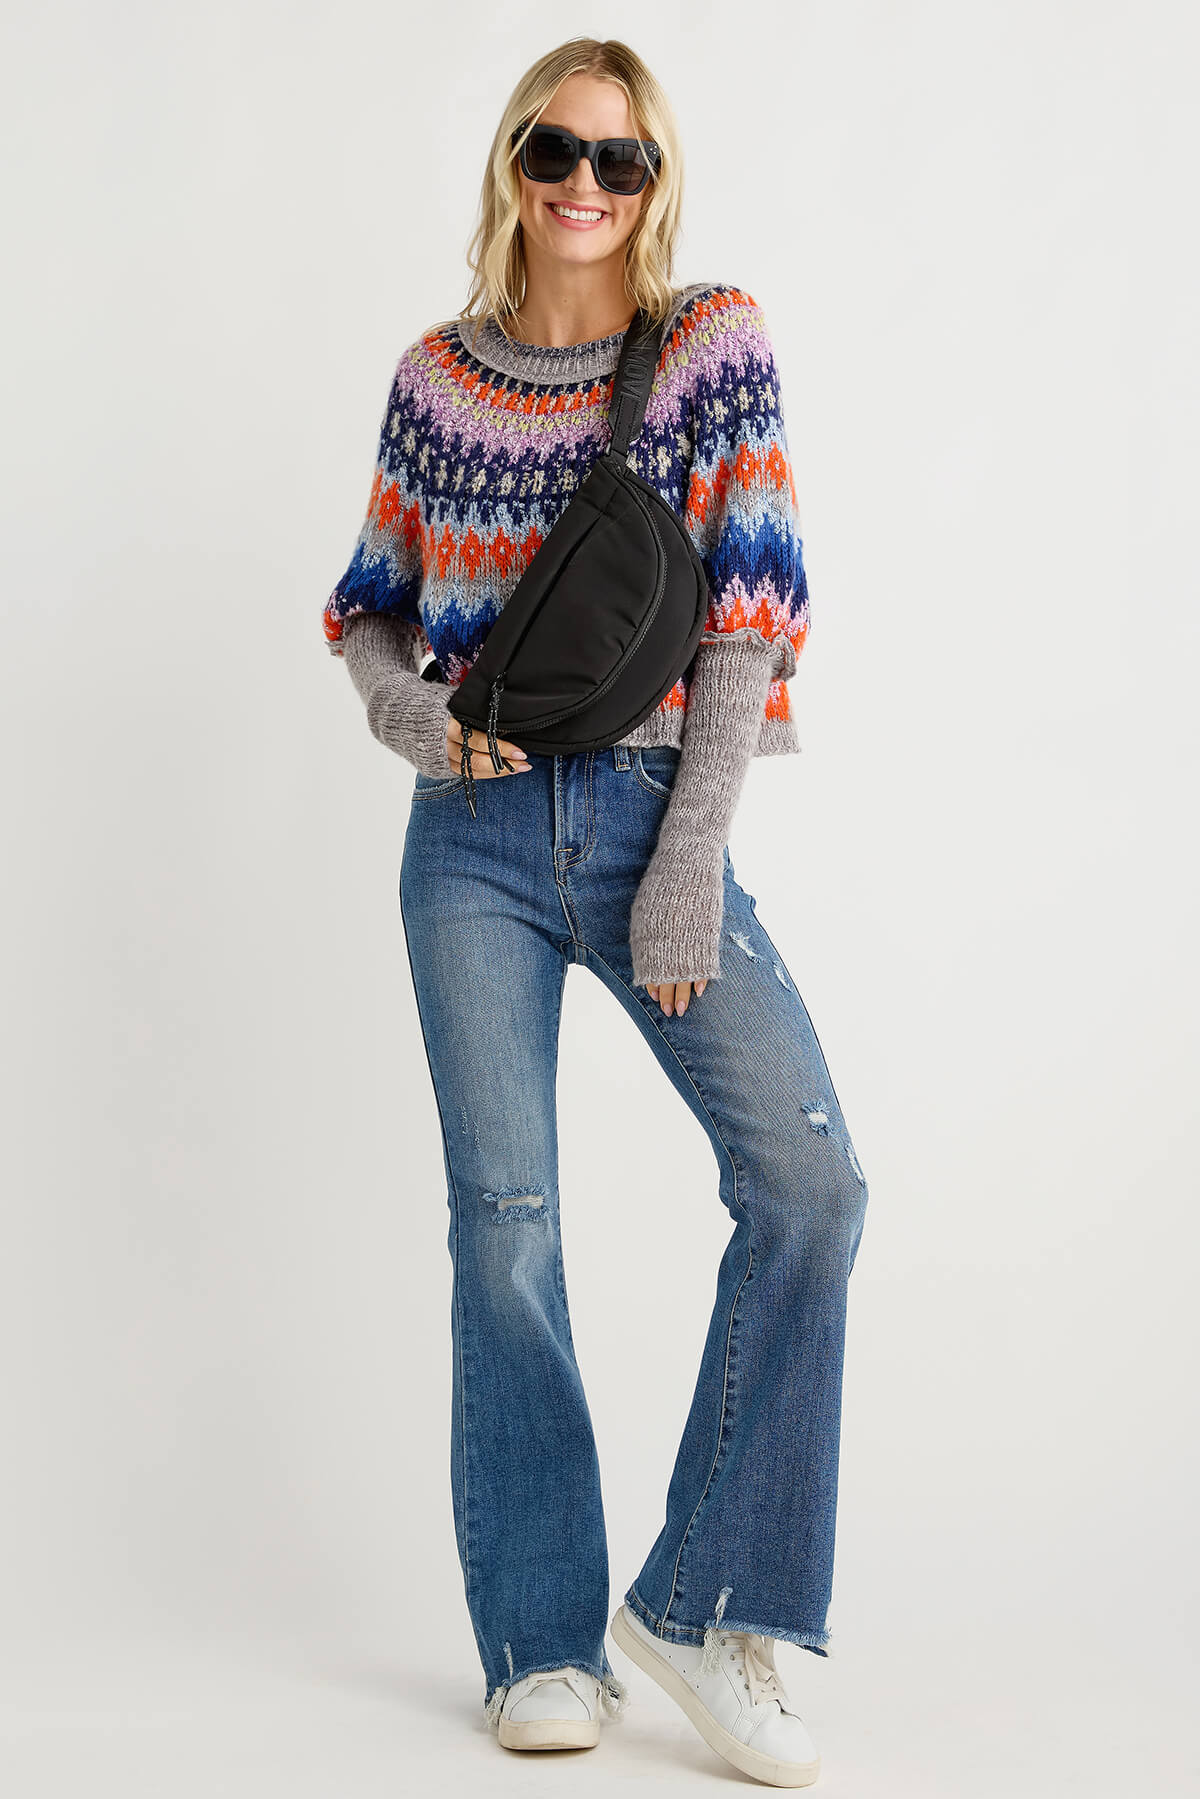 Free People Home for The Holidays Sweater